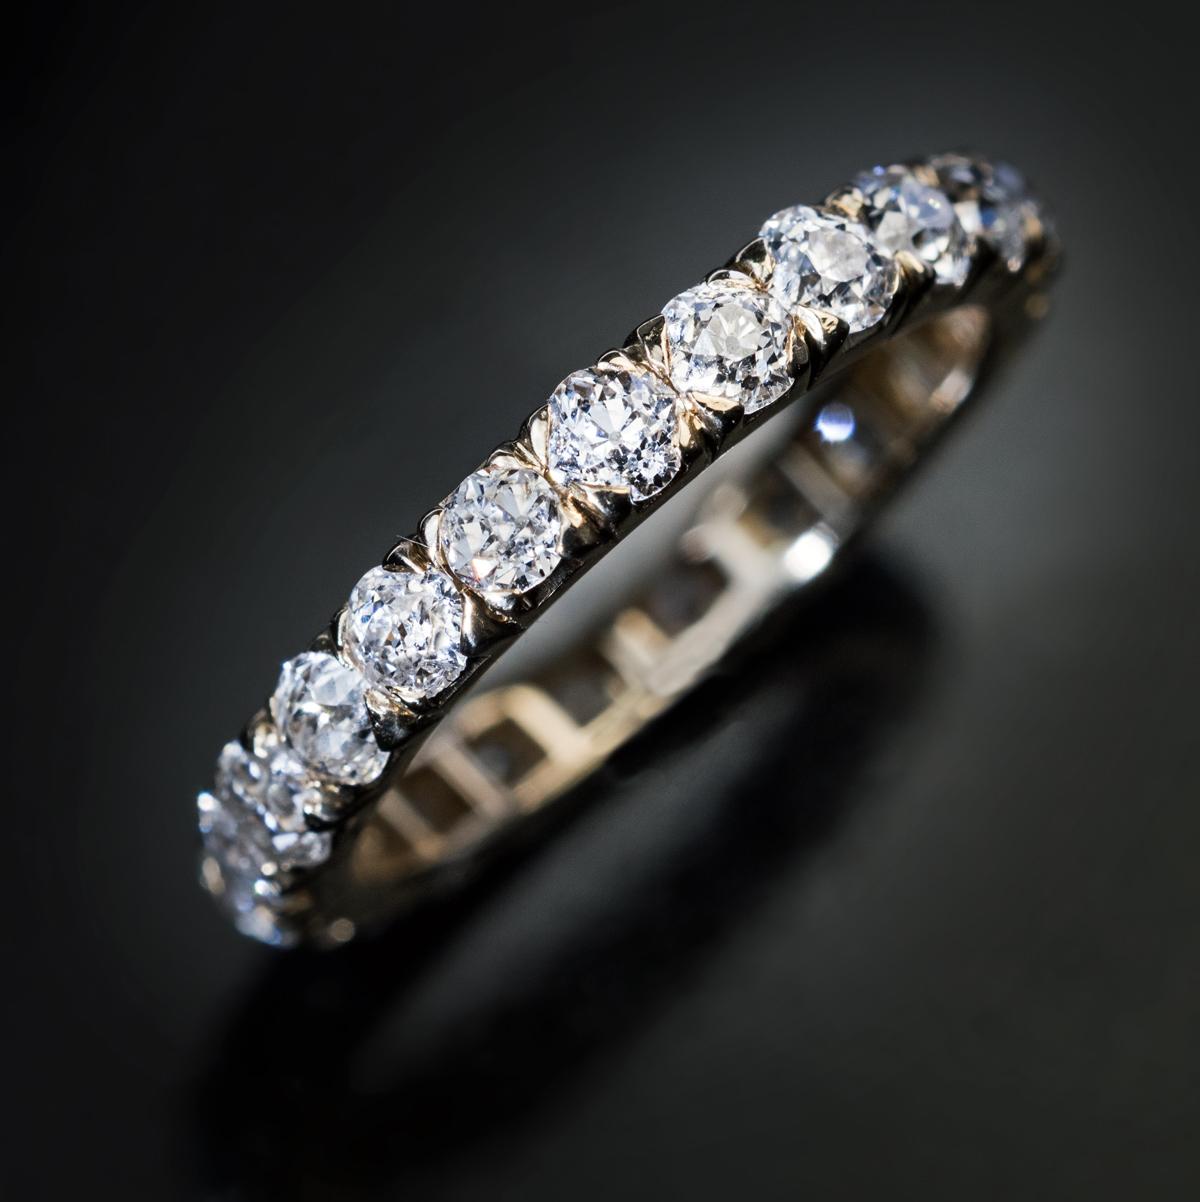 France, circa 1900.

This rare antique eternity band is handcrafted in 18K yellow gold and set with bright white chunky old European and old cushion cut diamonds (mostly F-G color, SI clarity).

Estimated total diamond weight is 2.30 ct.

The ring